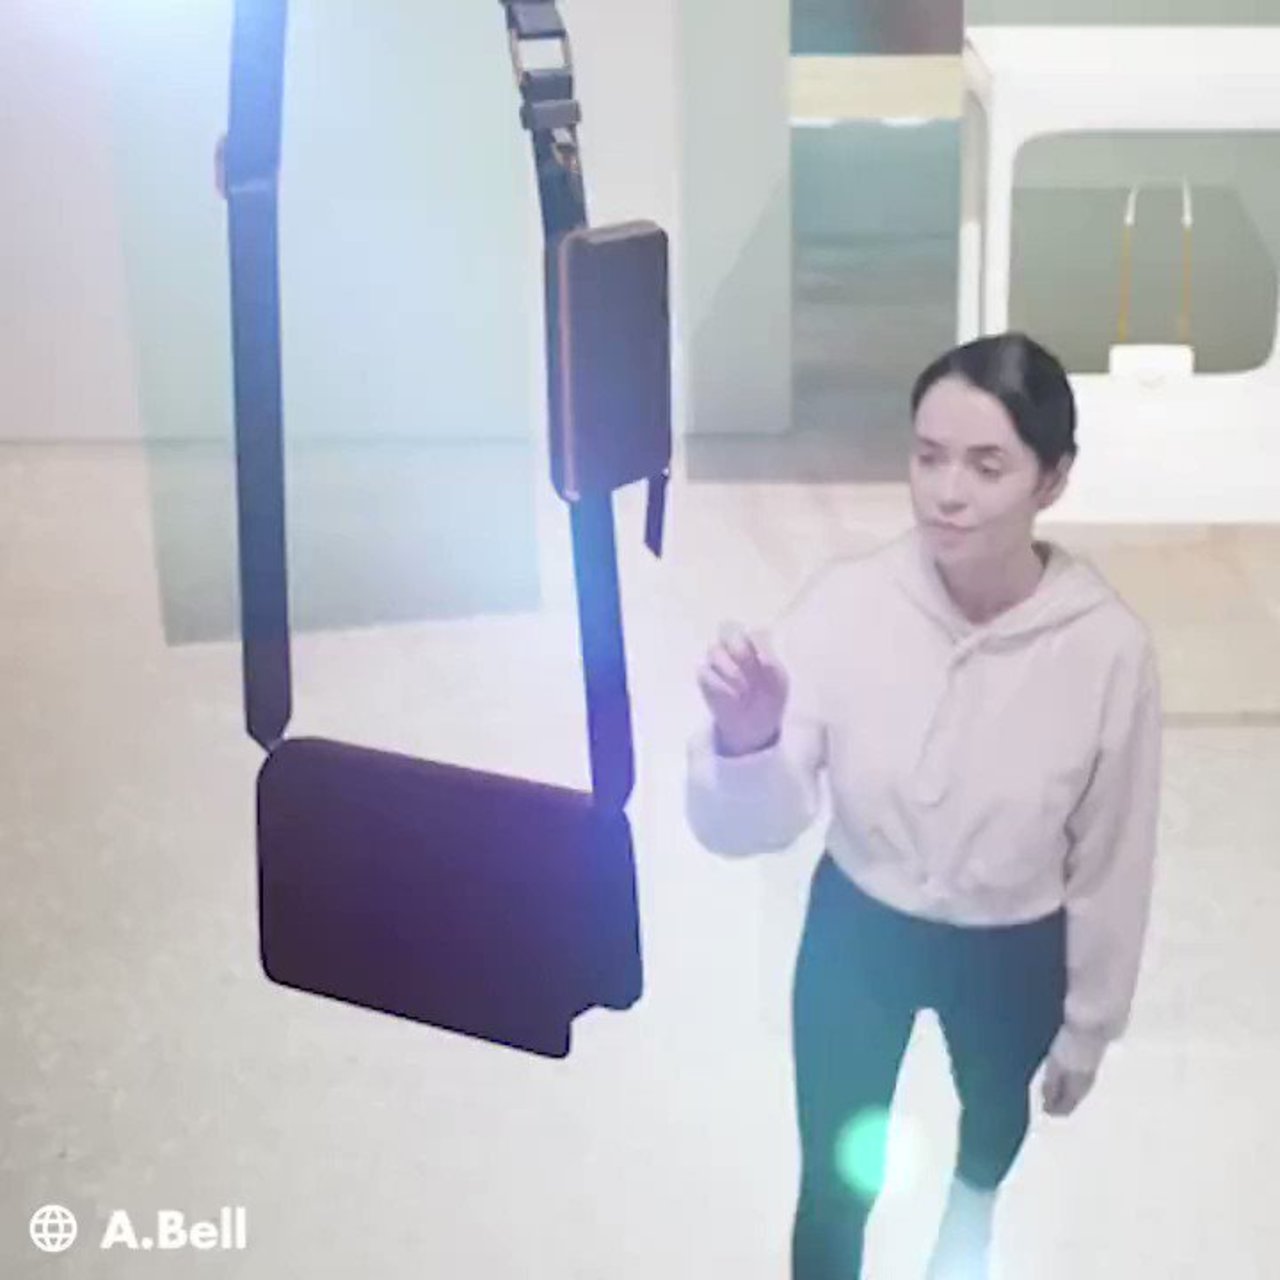 This #3D showroom makes you the designer of your own bag by @gigadgets_ #AI #ArtificialIntelligence #Innovation #Tech4Good #RetailTech cc: @maxjcm @ronald_vanloon @pascal_bornet @marcusborba https://t.co/X91R8BDlOp